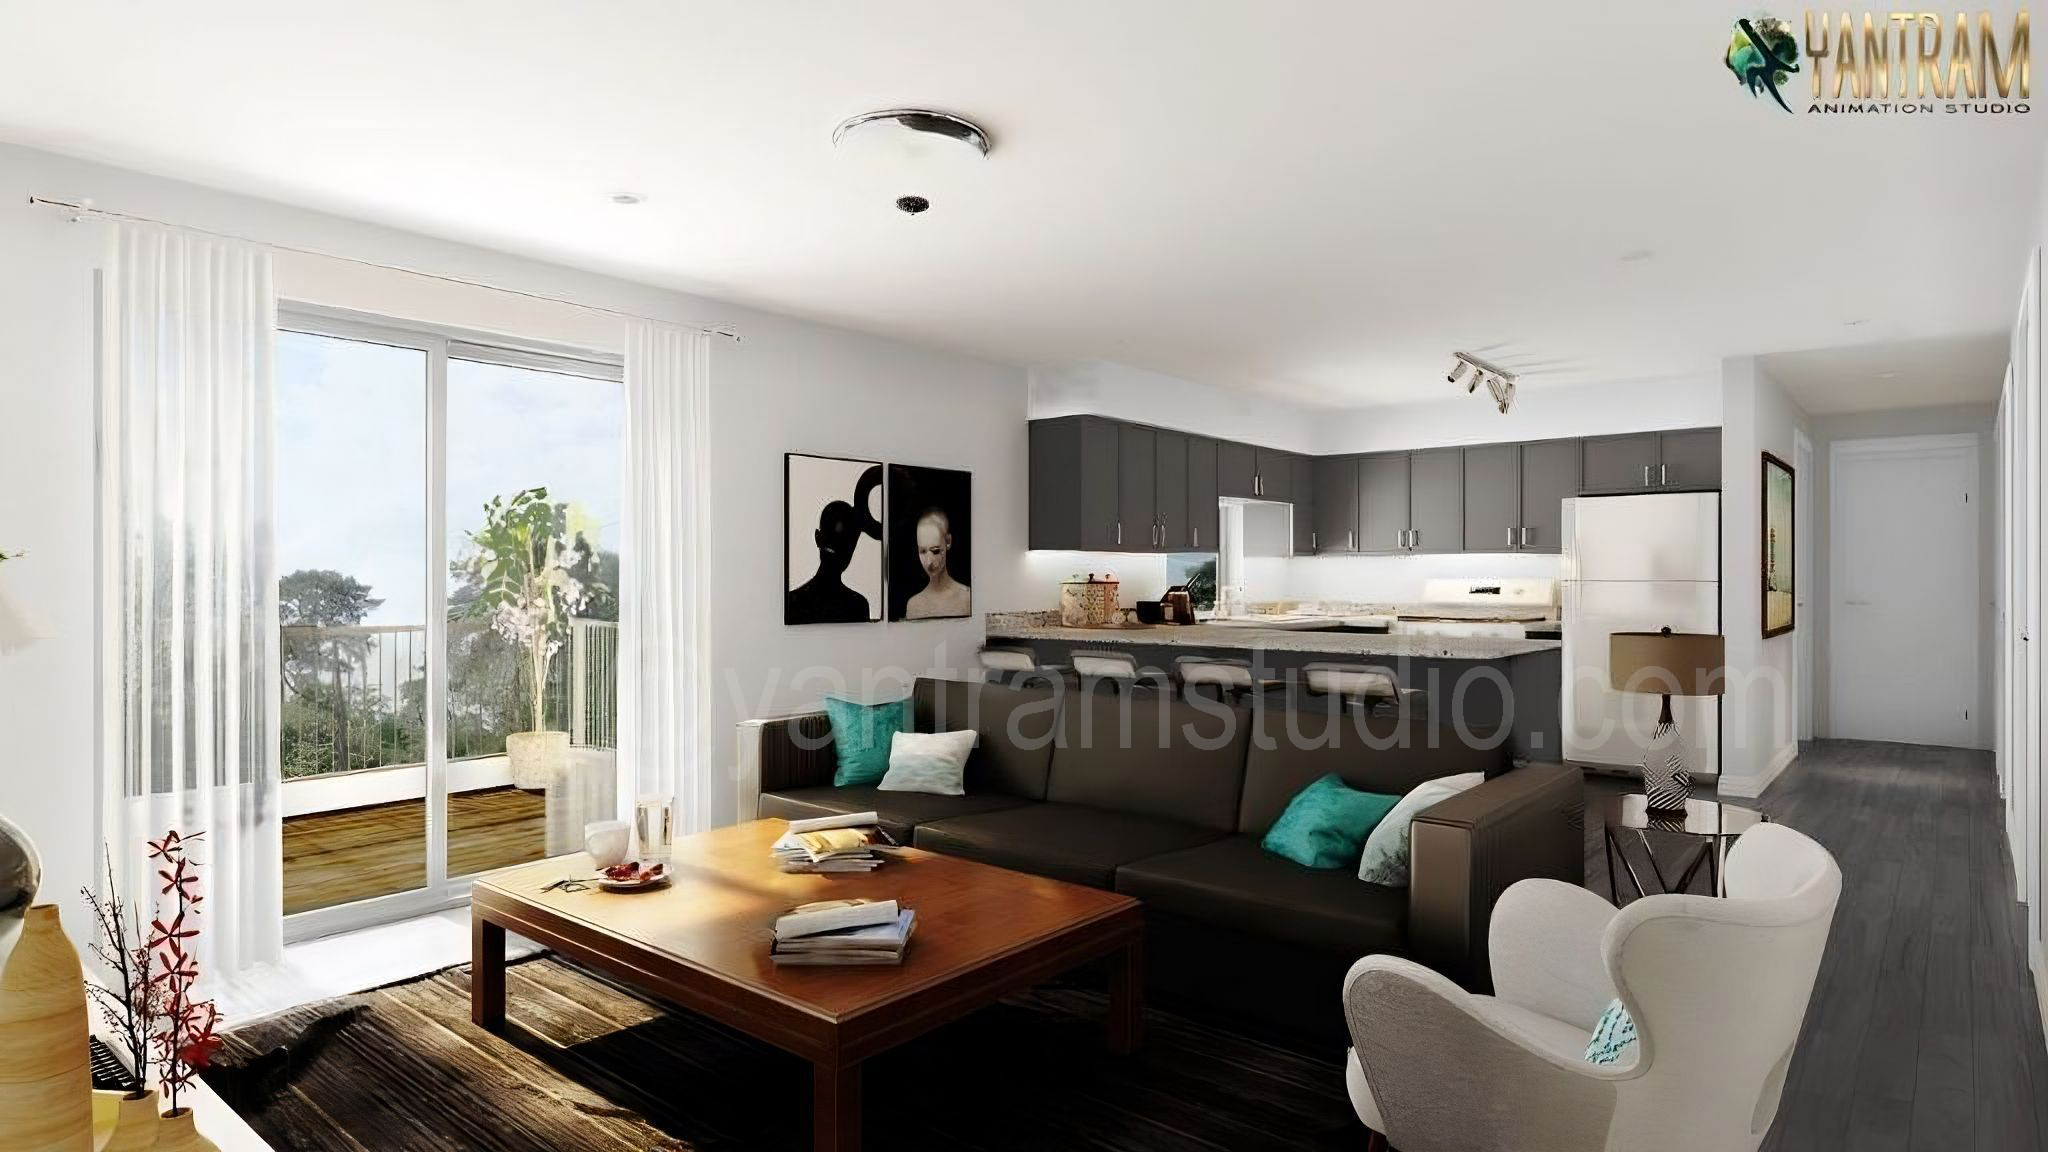 3D-Architectural-Animation-Services-in-Miami.jpg - 3D architectural animation services are used more extensively in various projects. They are used to create a three-dimensional walk-through of a building or space.For More Visit: https://yantramstudio.com/ by Yantramarchitecturaldesignstudio